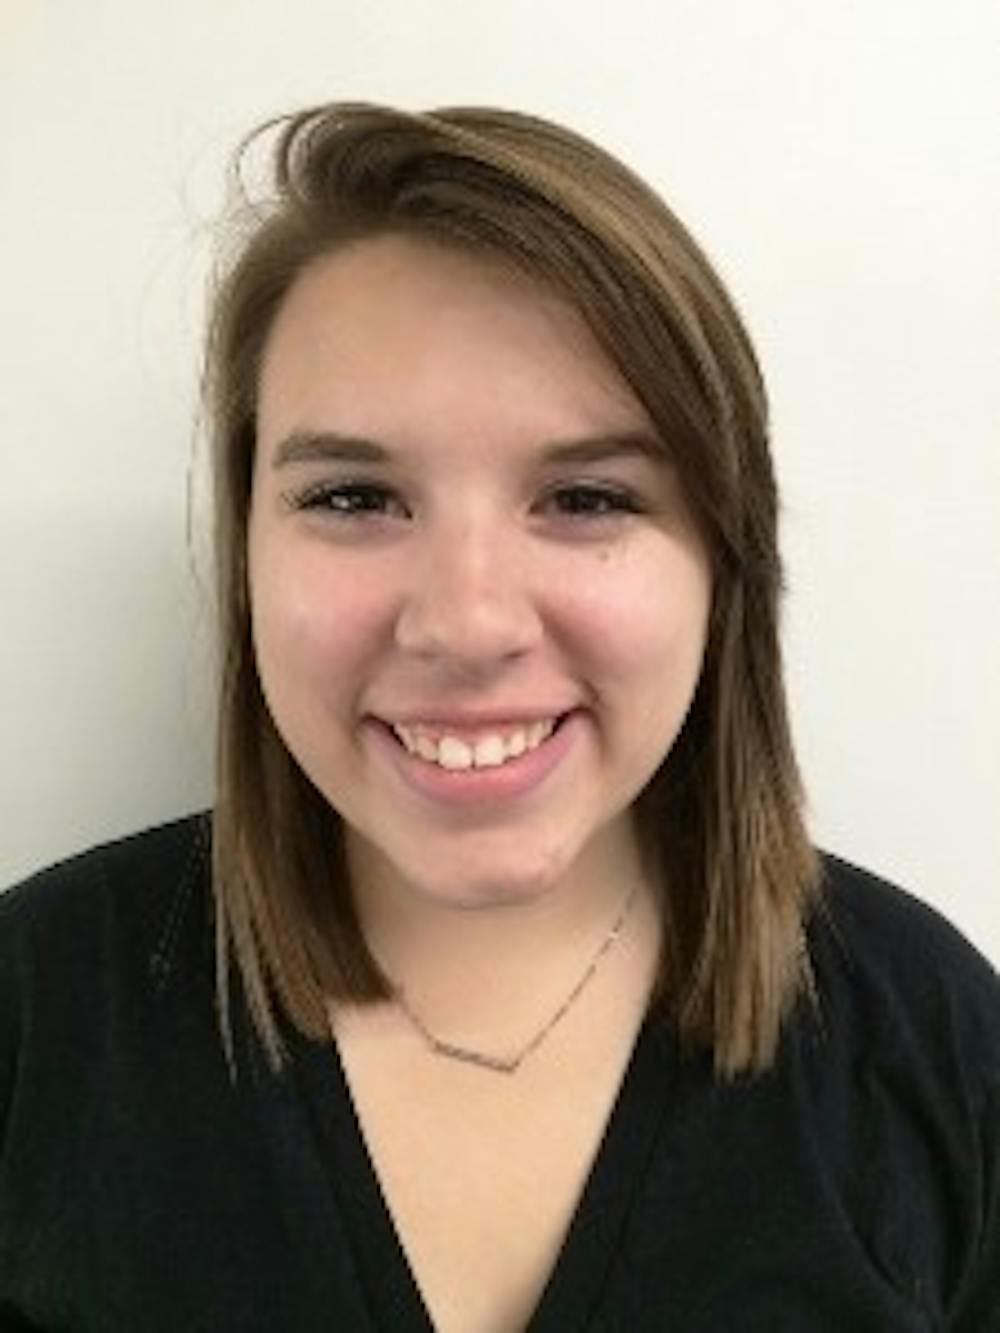 <p><em>Breanna Daugherty is a sophomore photojournalism major and writes ‘In BRiEf’ for The Daily News. Her views do not necessarily agree with those of the newspaper or The Daily. Write to Breanna at bldaughtery2@bsu.edu.</em></p>